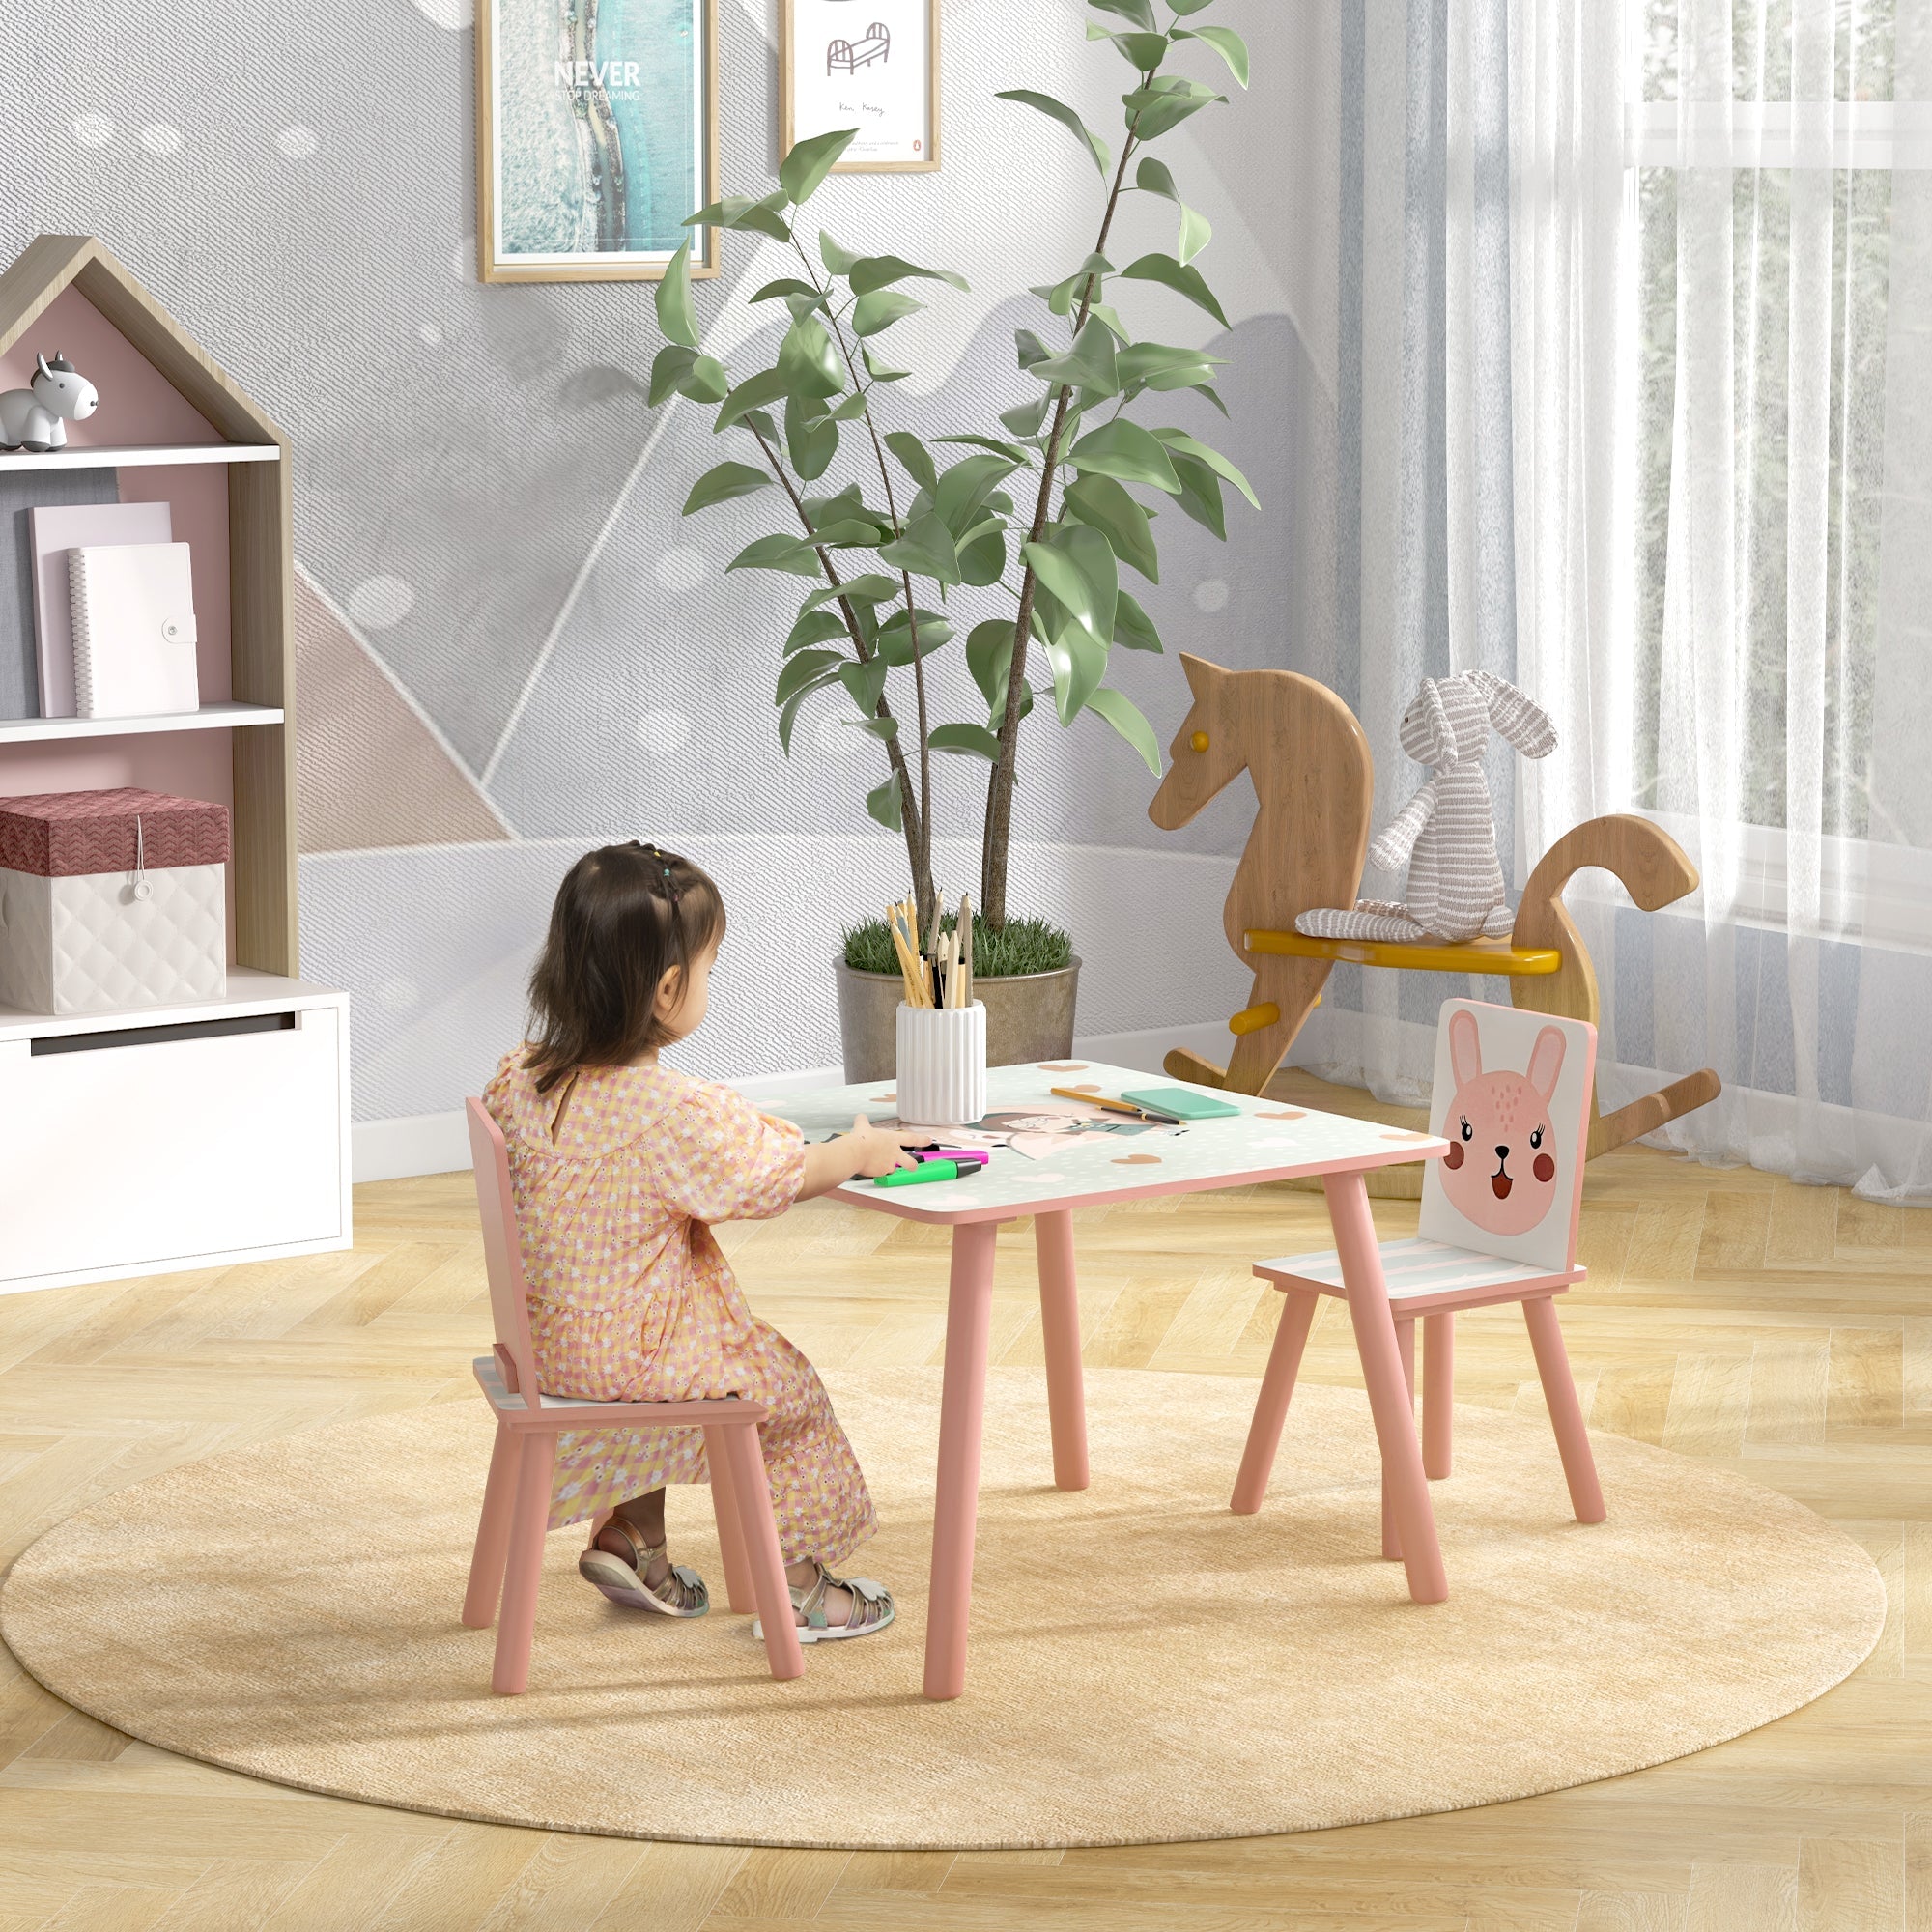 ZONEKIZ Toddler Desk and Chair Set, Kids Activity Table with Two Chairs, Furniture for Ages 3-6, Pink - TovaHaus